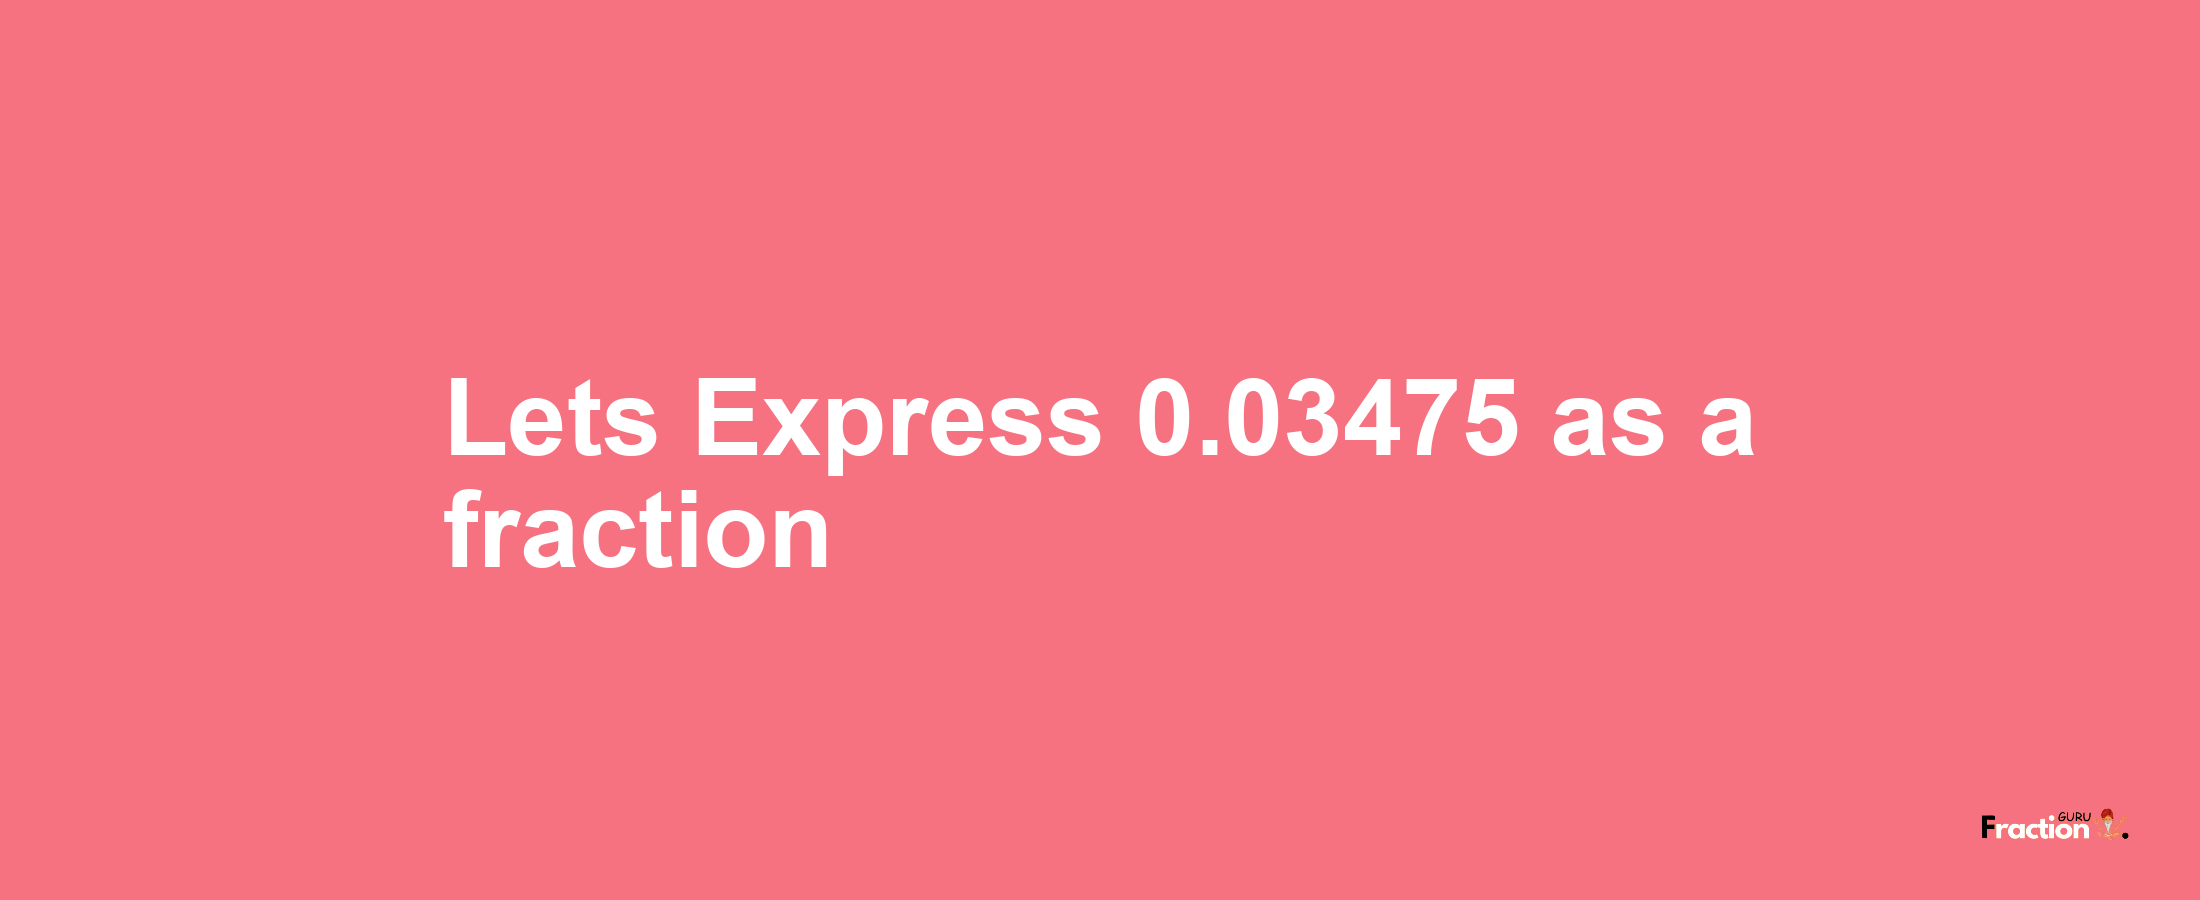 Lets Express 0.03475 as afraction